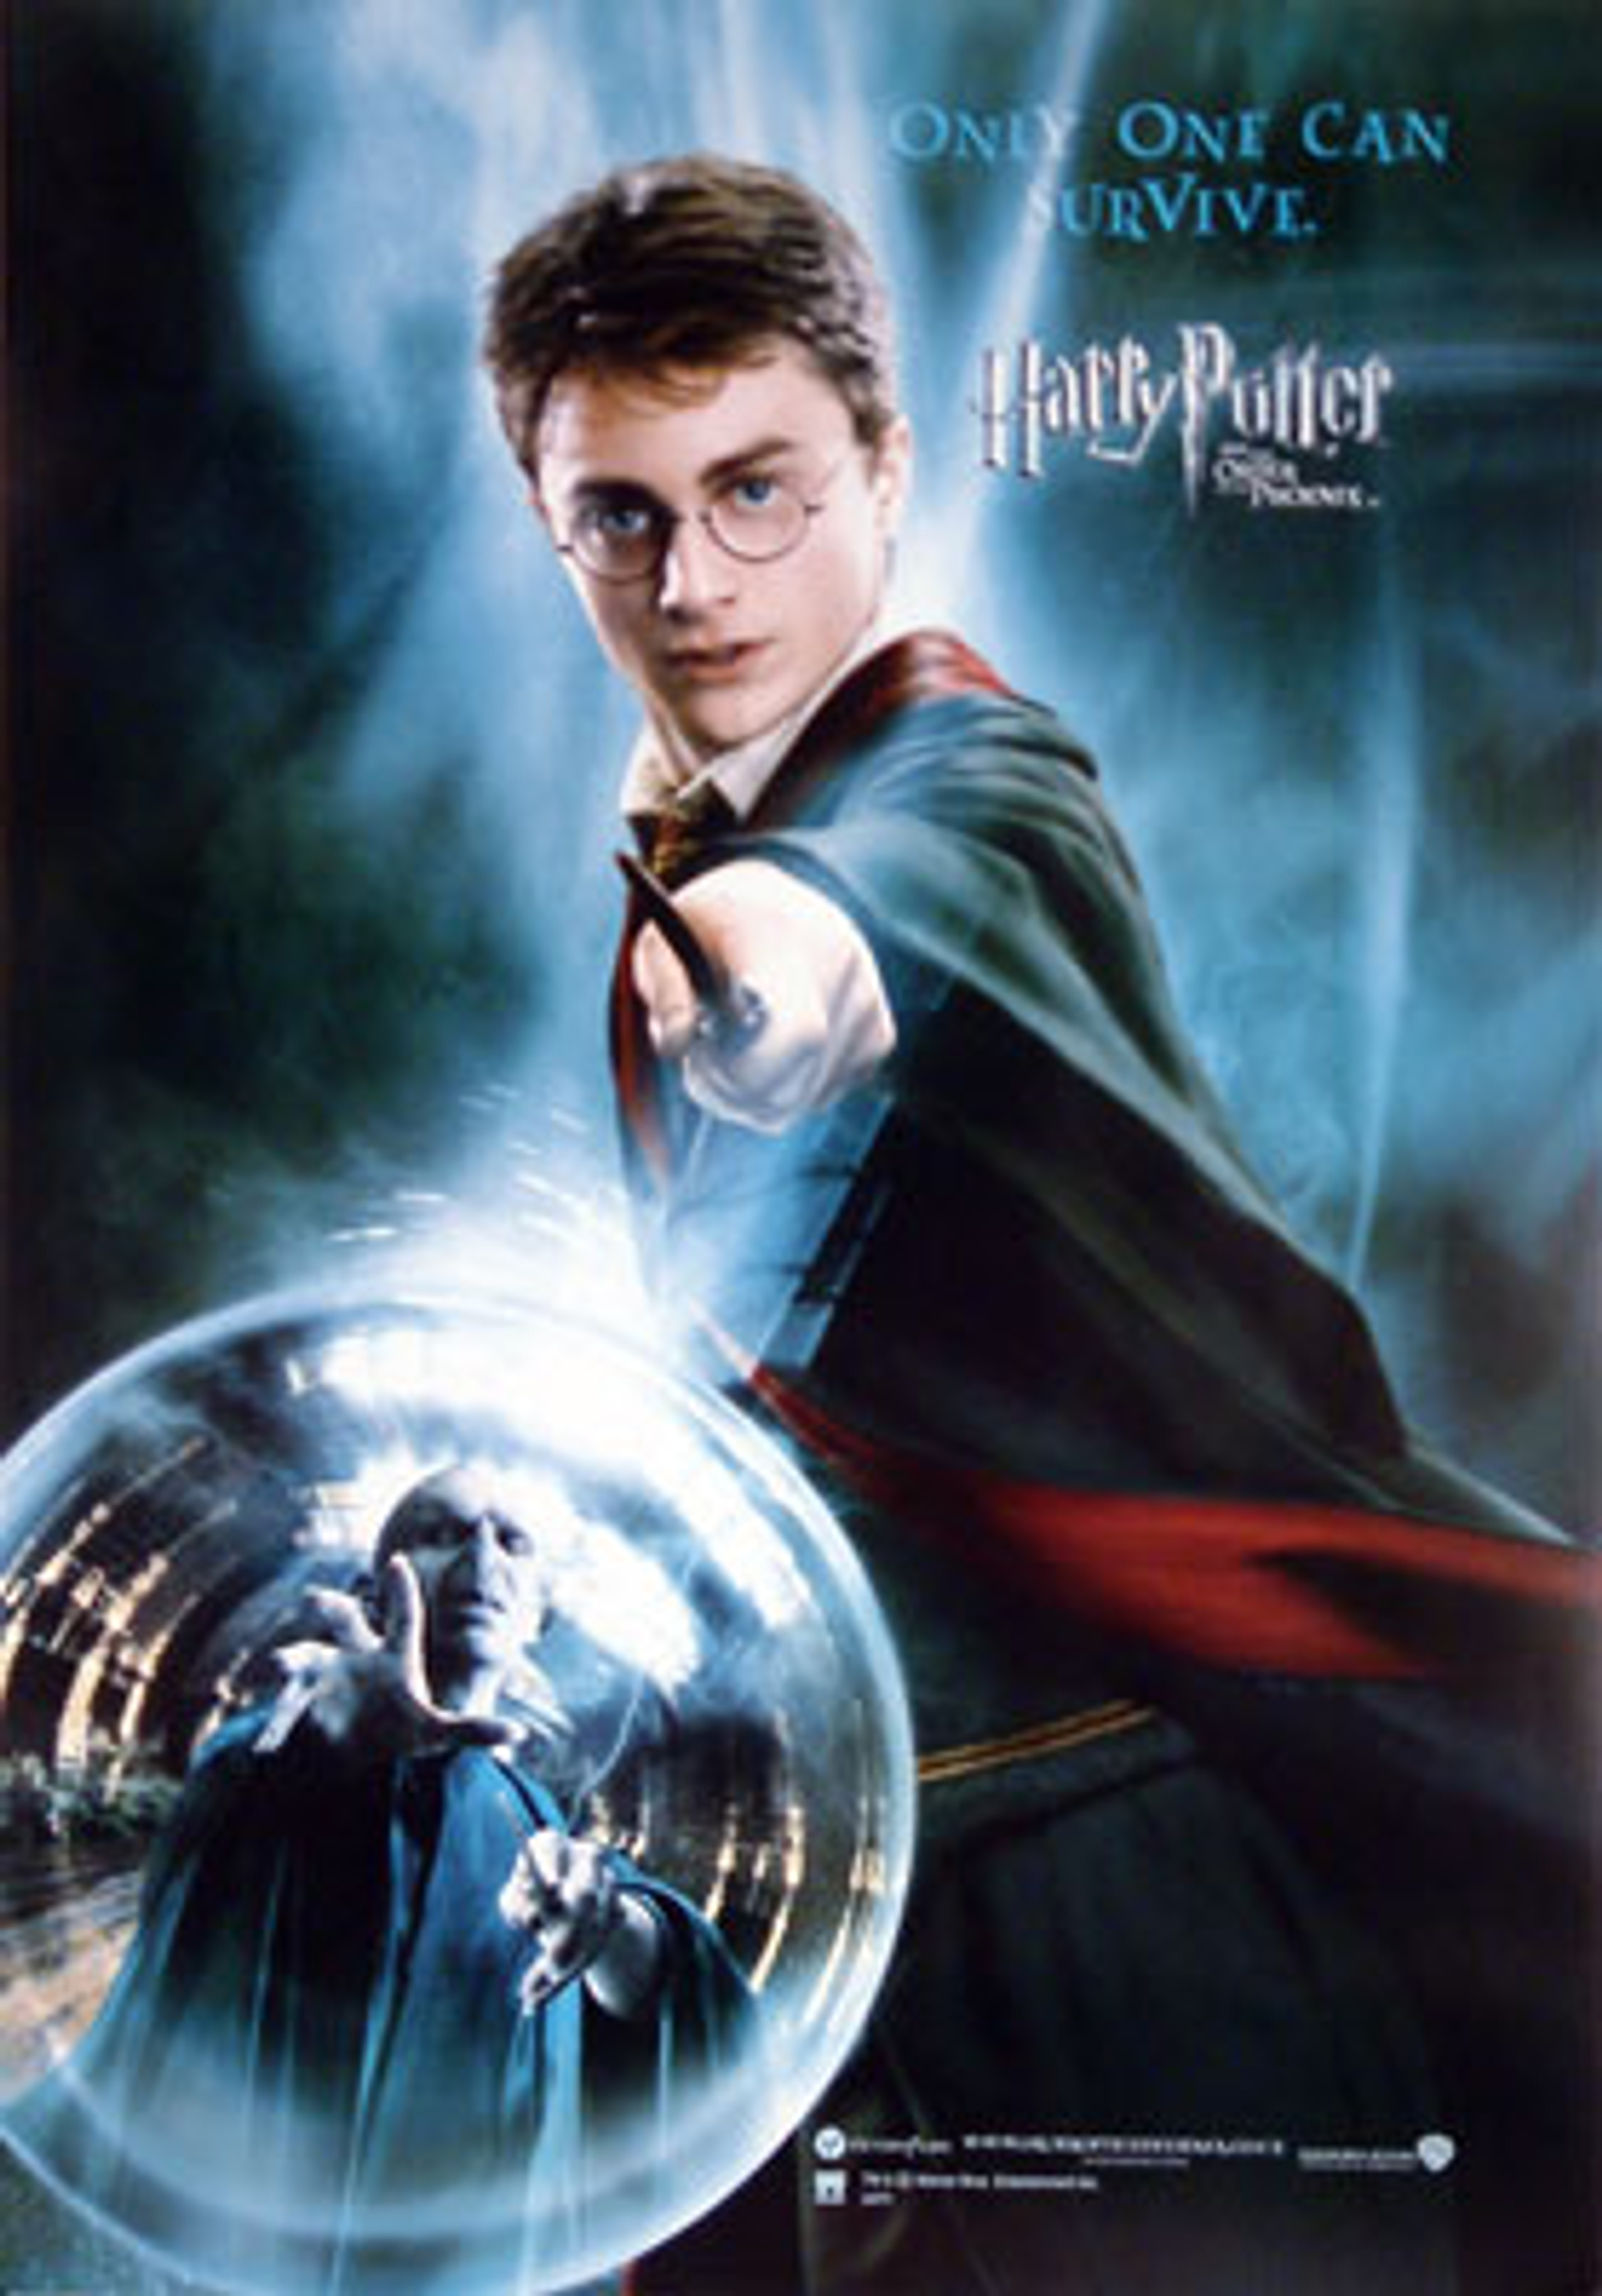 harry potter and the order of the phoenix full movie online 123movies